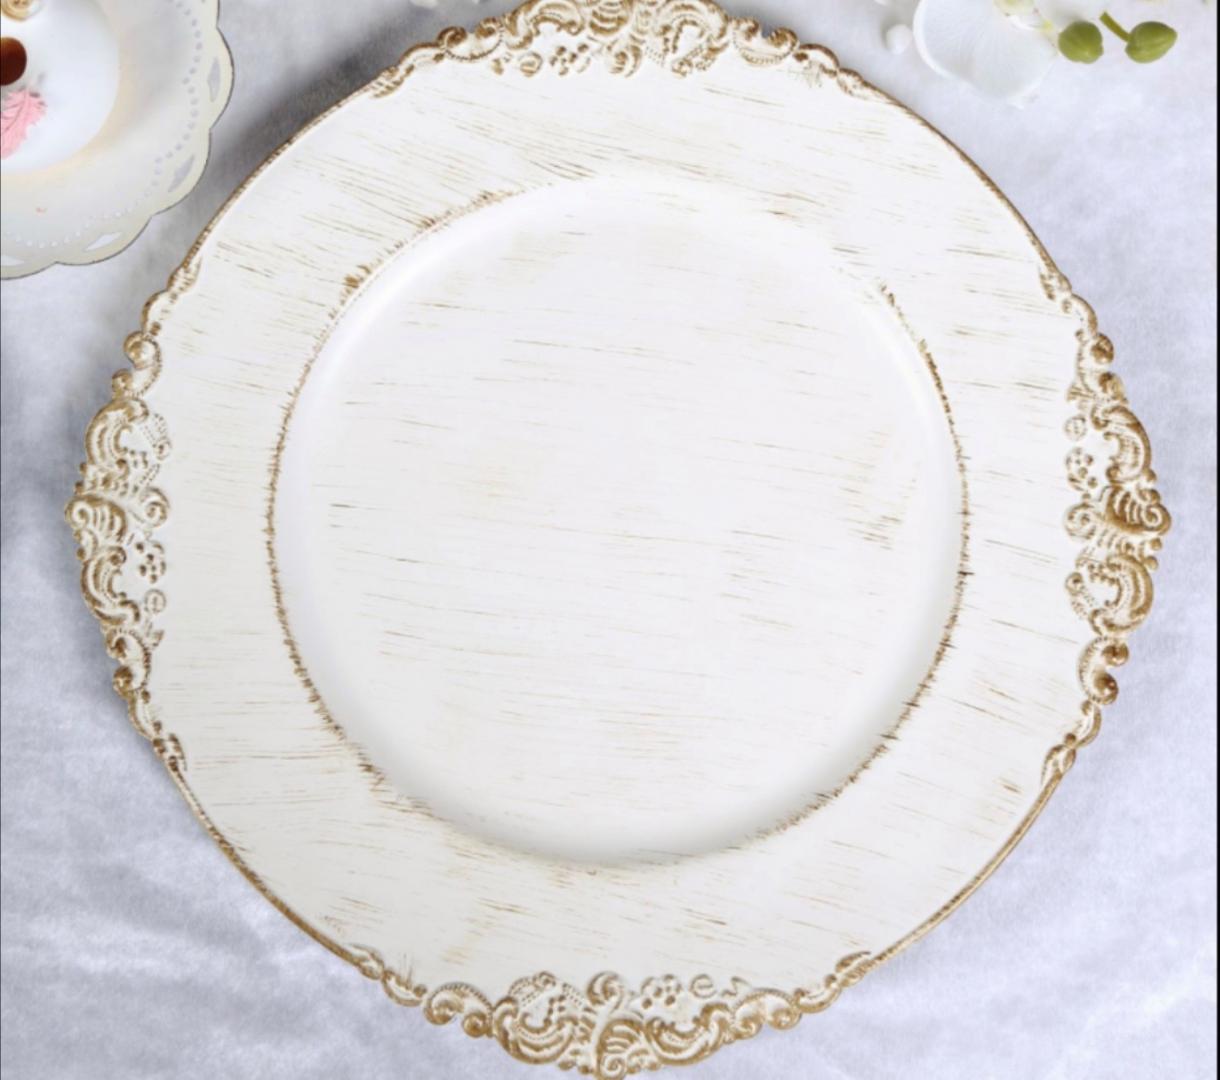 White Round Baroque Plastic Charger Plate $ 2.50